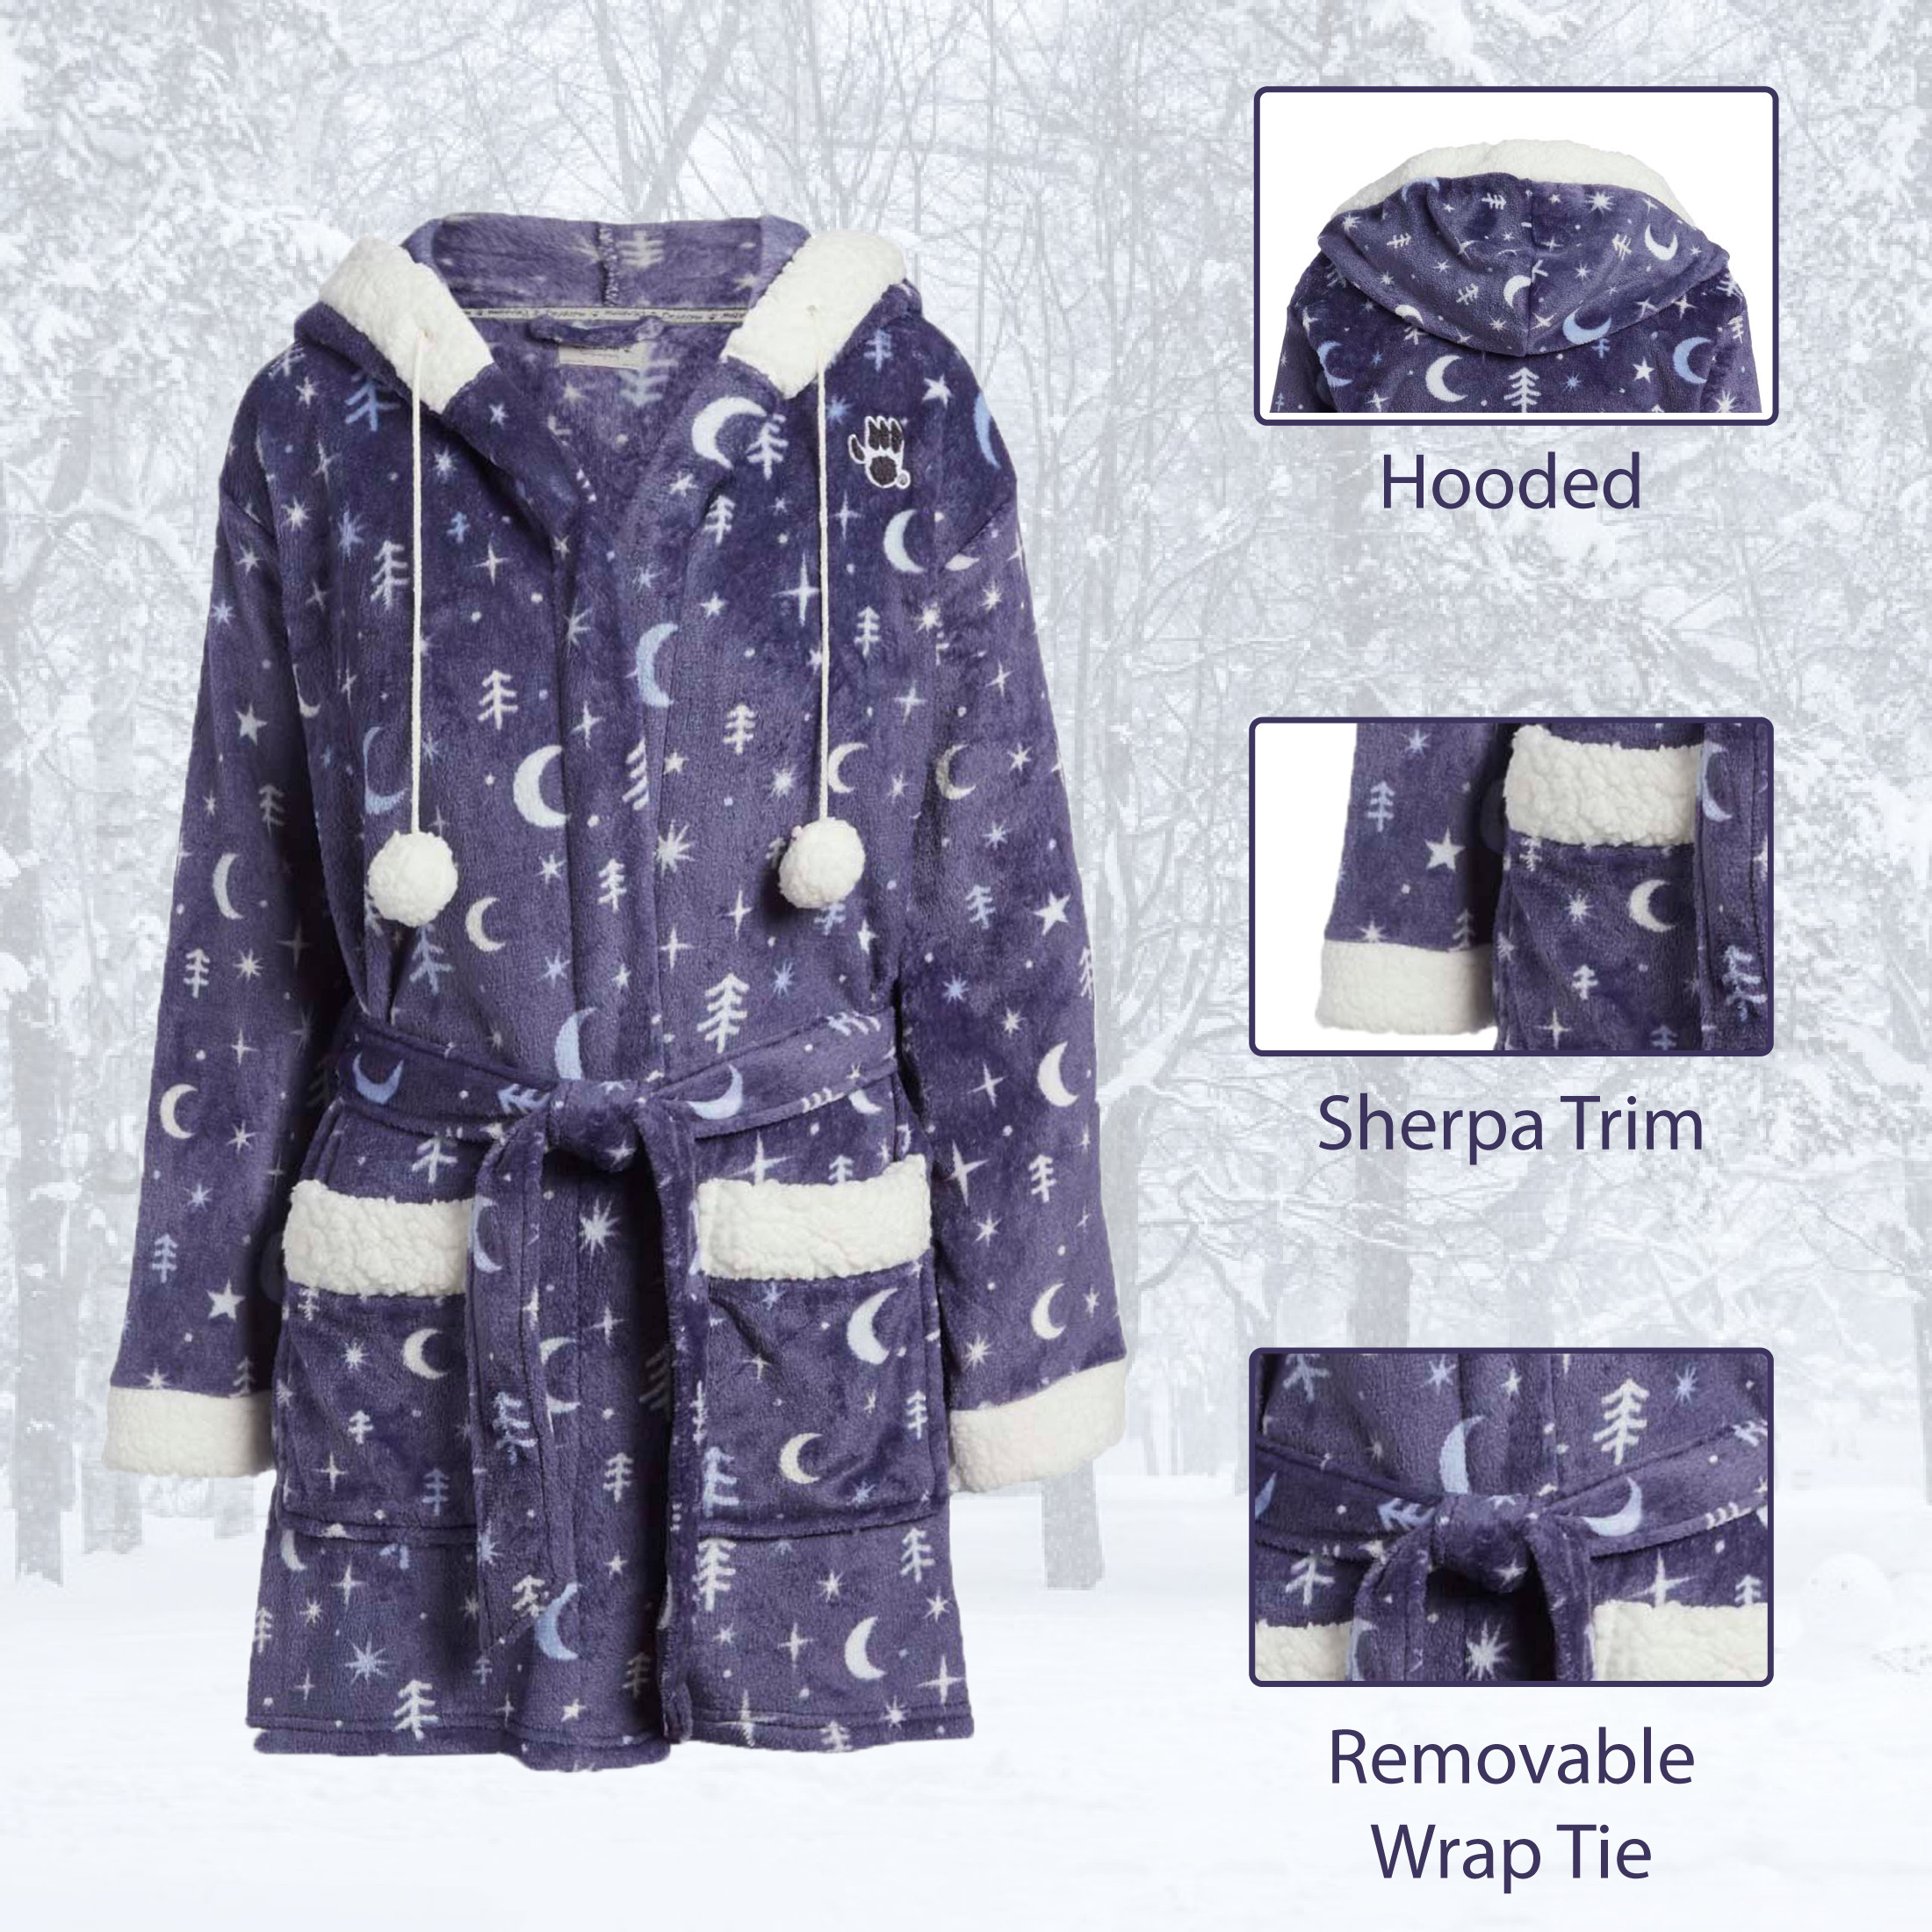 2-Pack: Women's Soft Plush Sherpa Lined Trim Print Robe With Pockets And Hood - X-Large